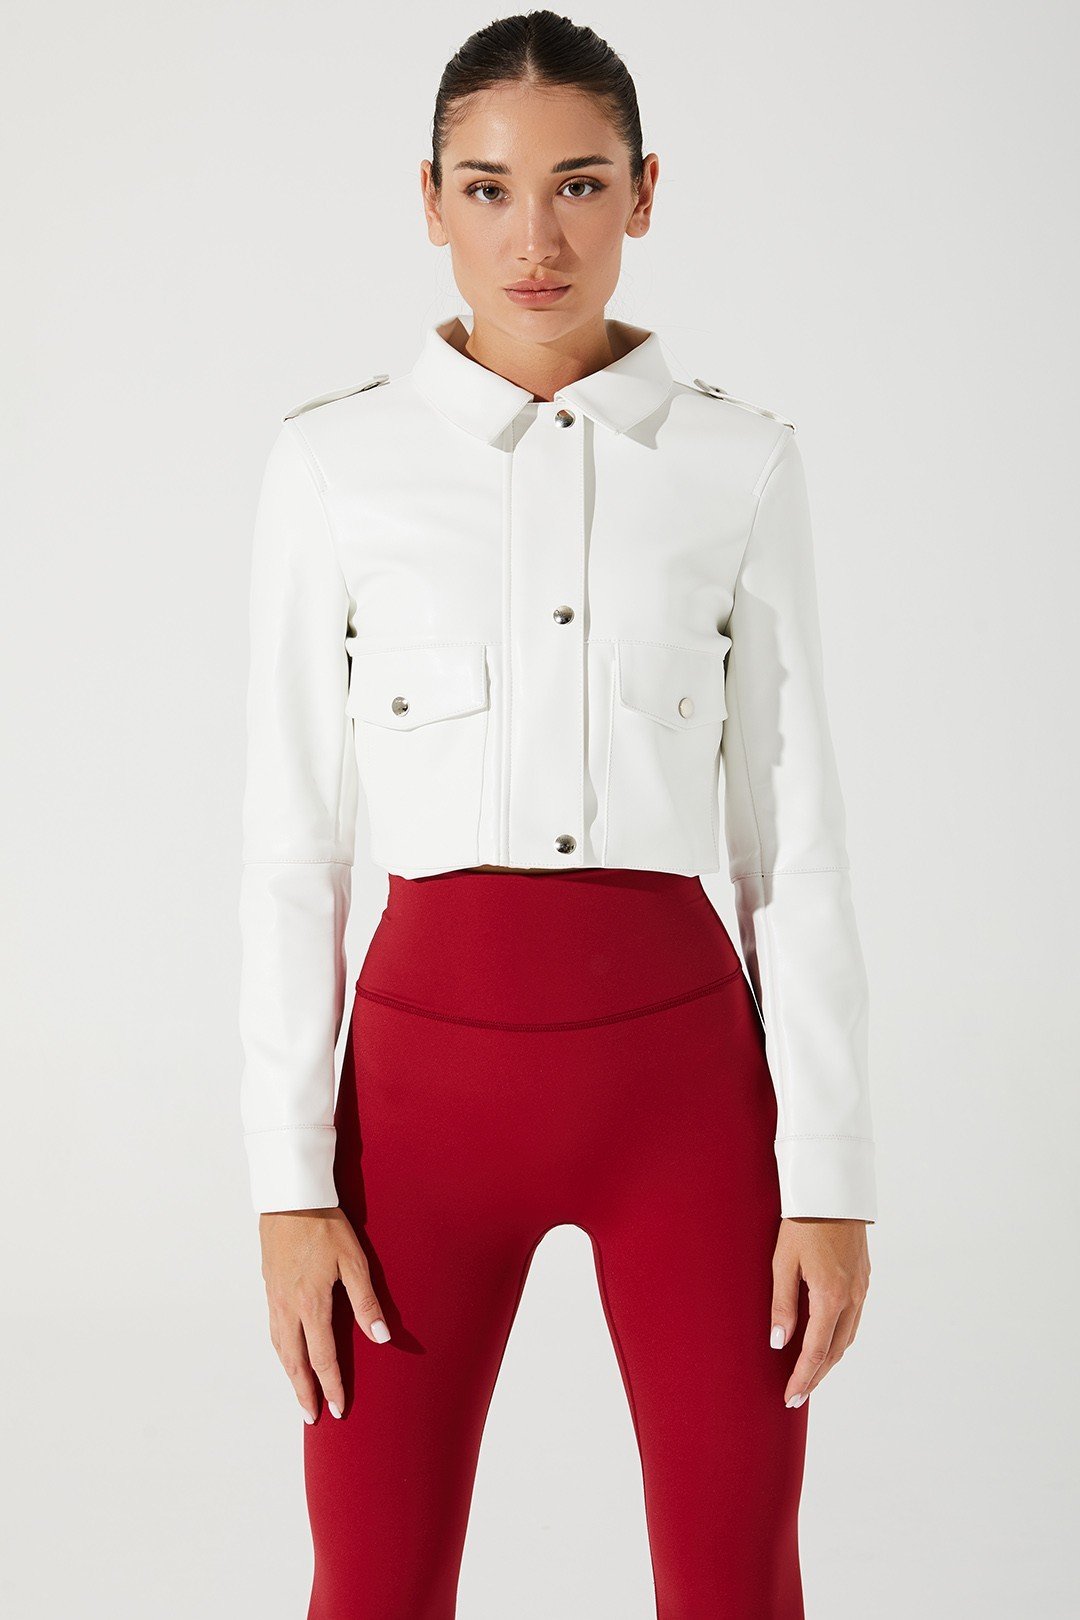 Stylish urban rebel women's white jacket with a touch of elegance - OW-0042-WJK-WT_5.